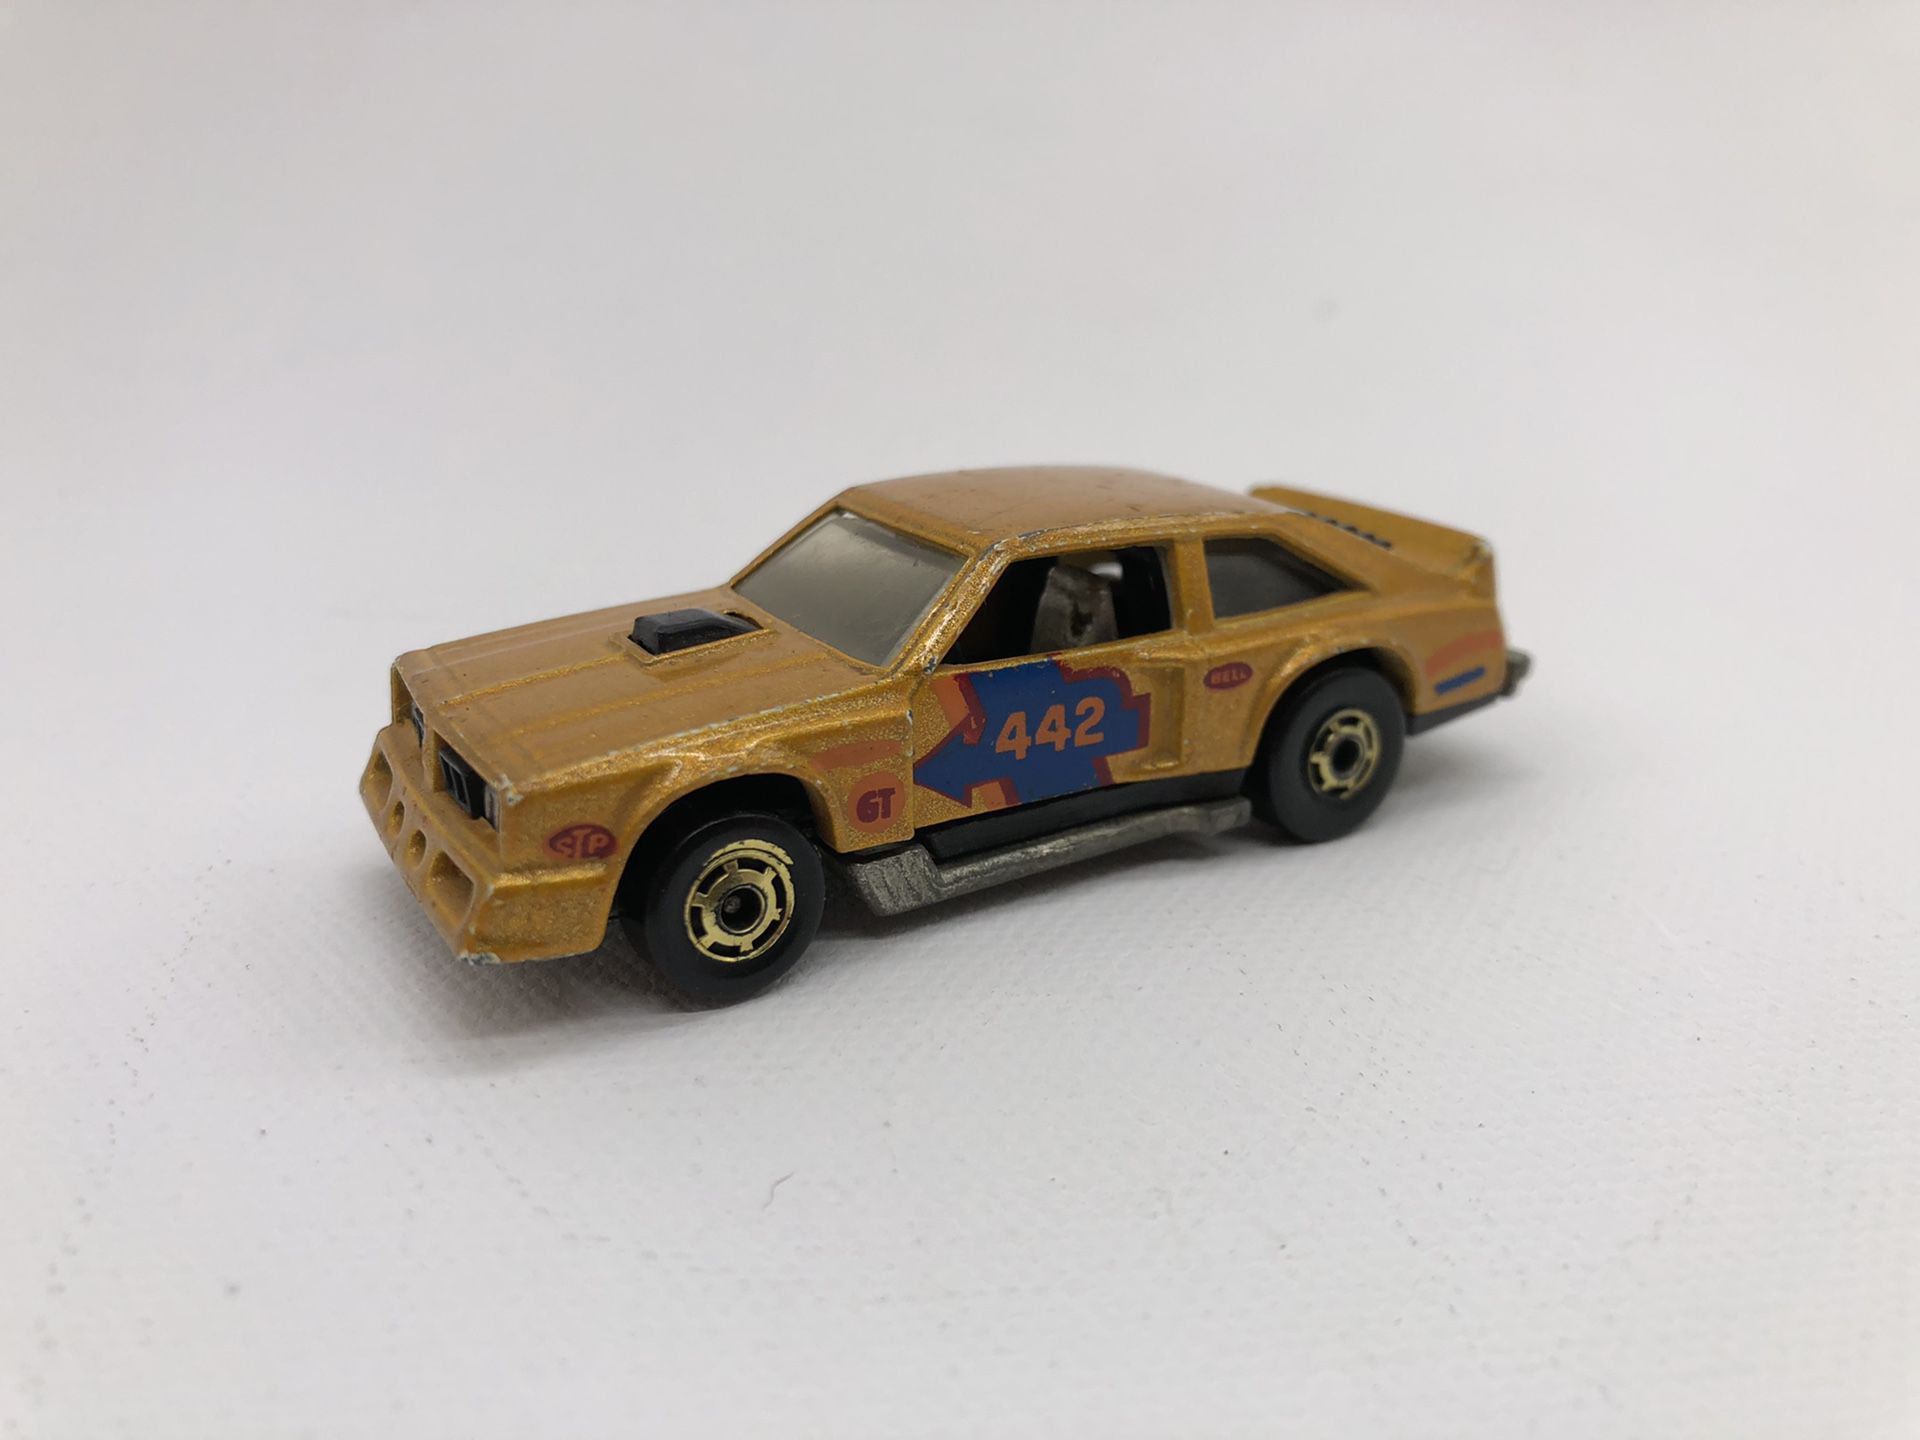 Hot Wheels Vintage 1983 Flat Out 442